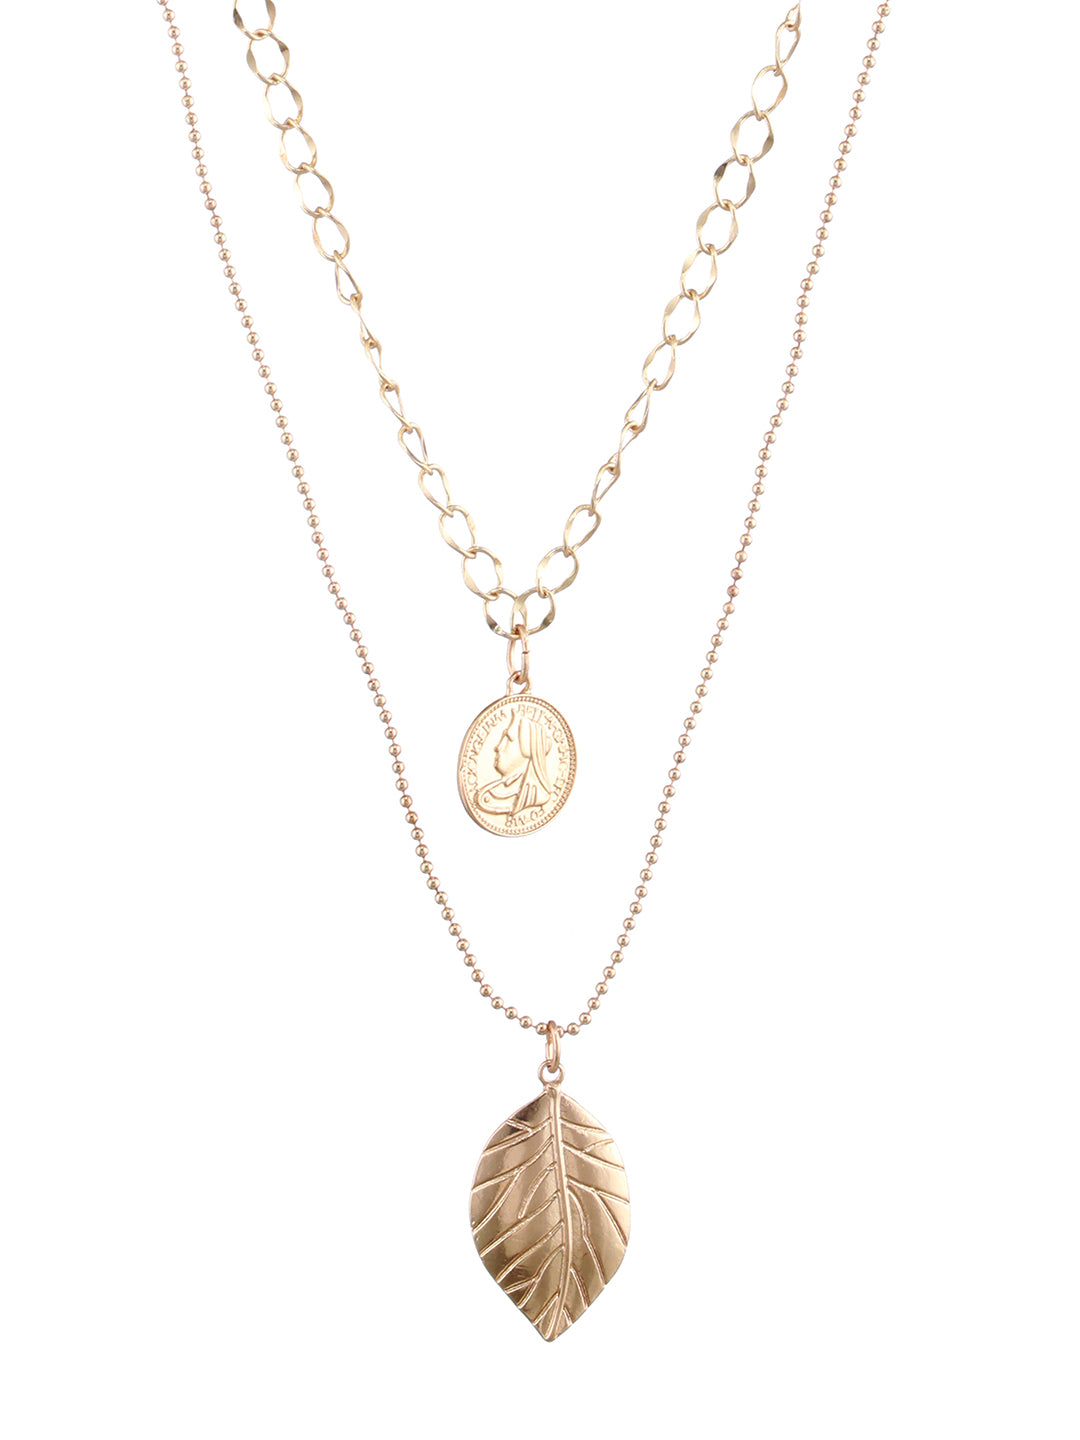 Embossed Leaf Design Dual-Layered Gold-Plated Necklace